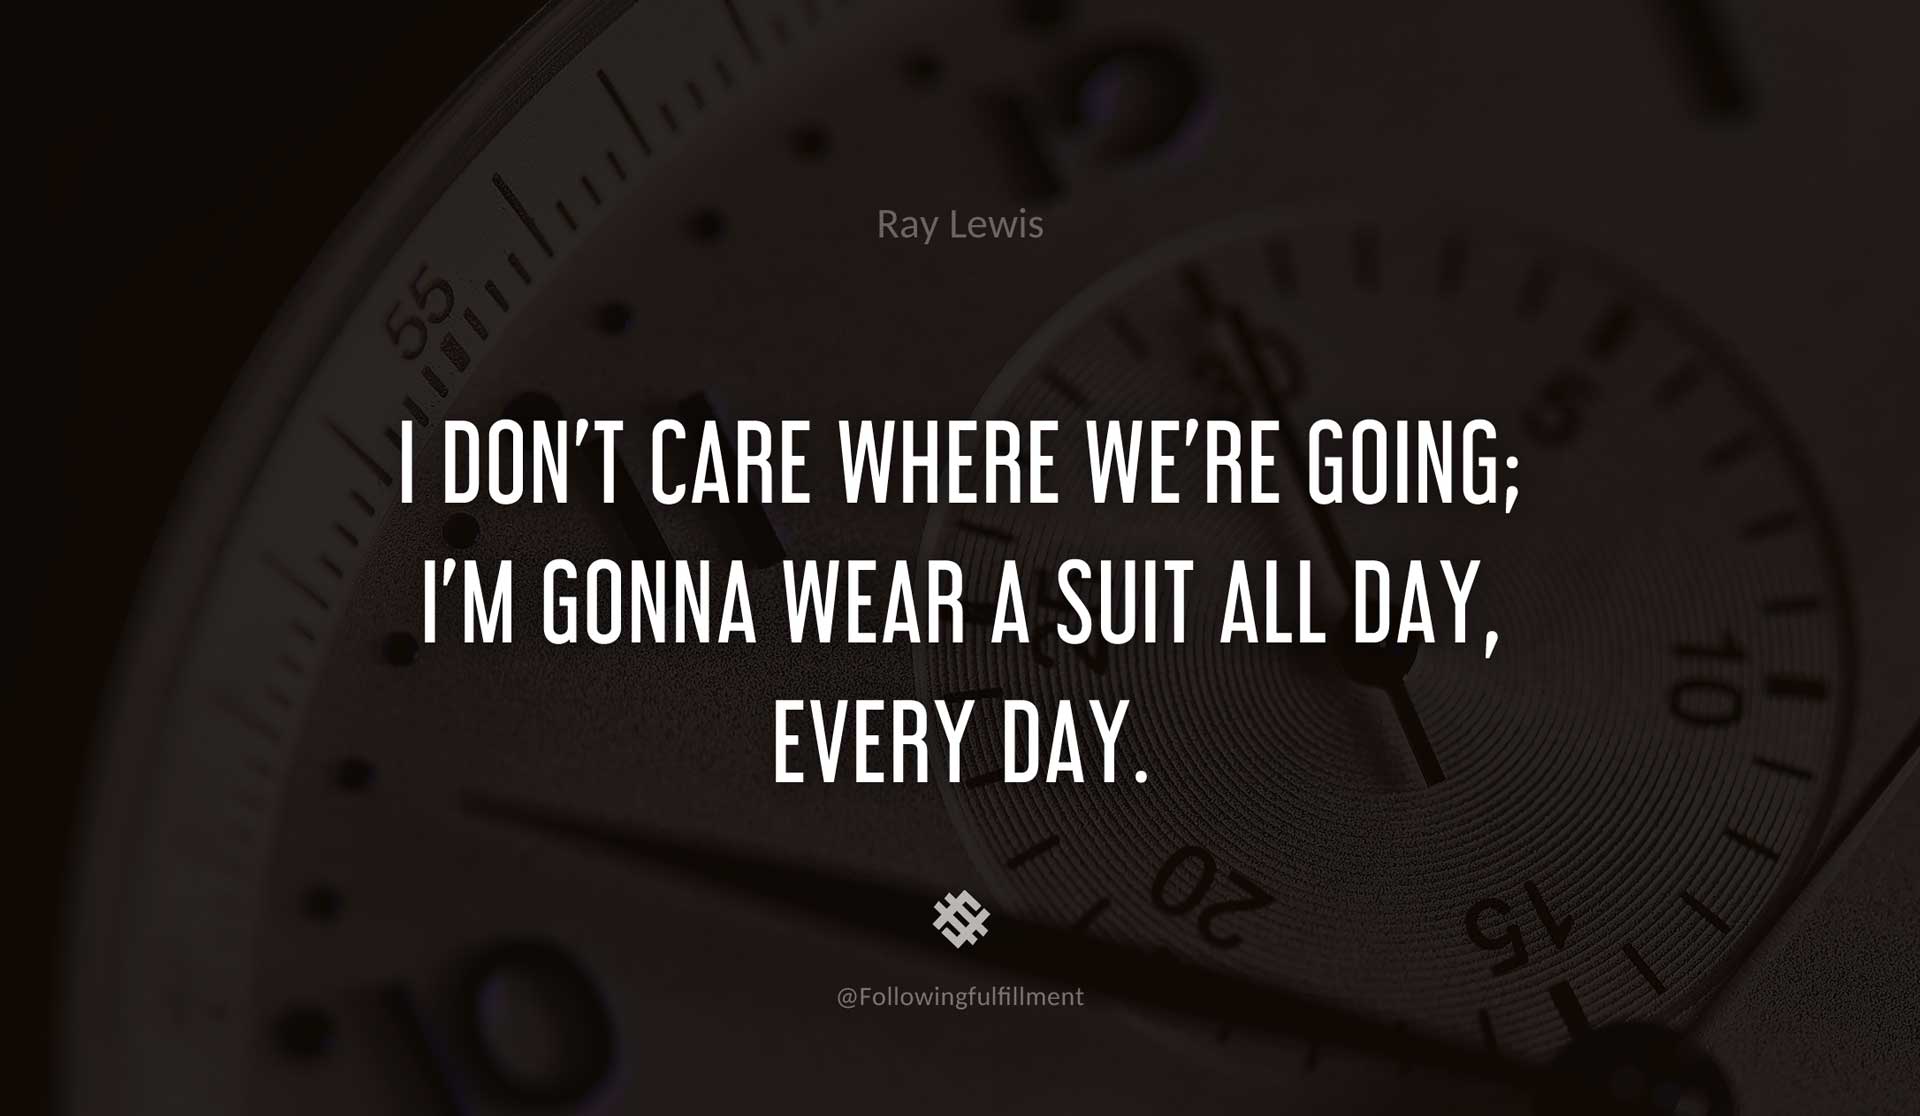 I-don't-care-where-we're-going;-I'm-gonna-wear-a-suit-all-day,-every-day.-RAY-LEWIS-Quote.jpg